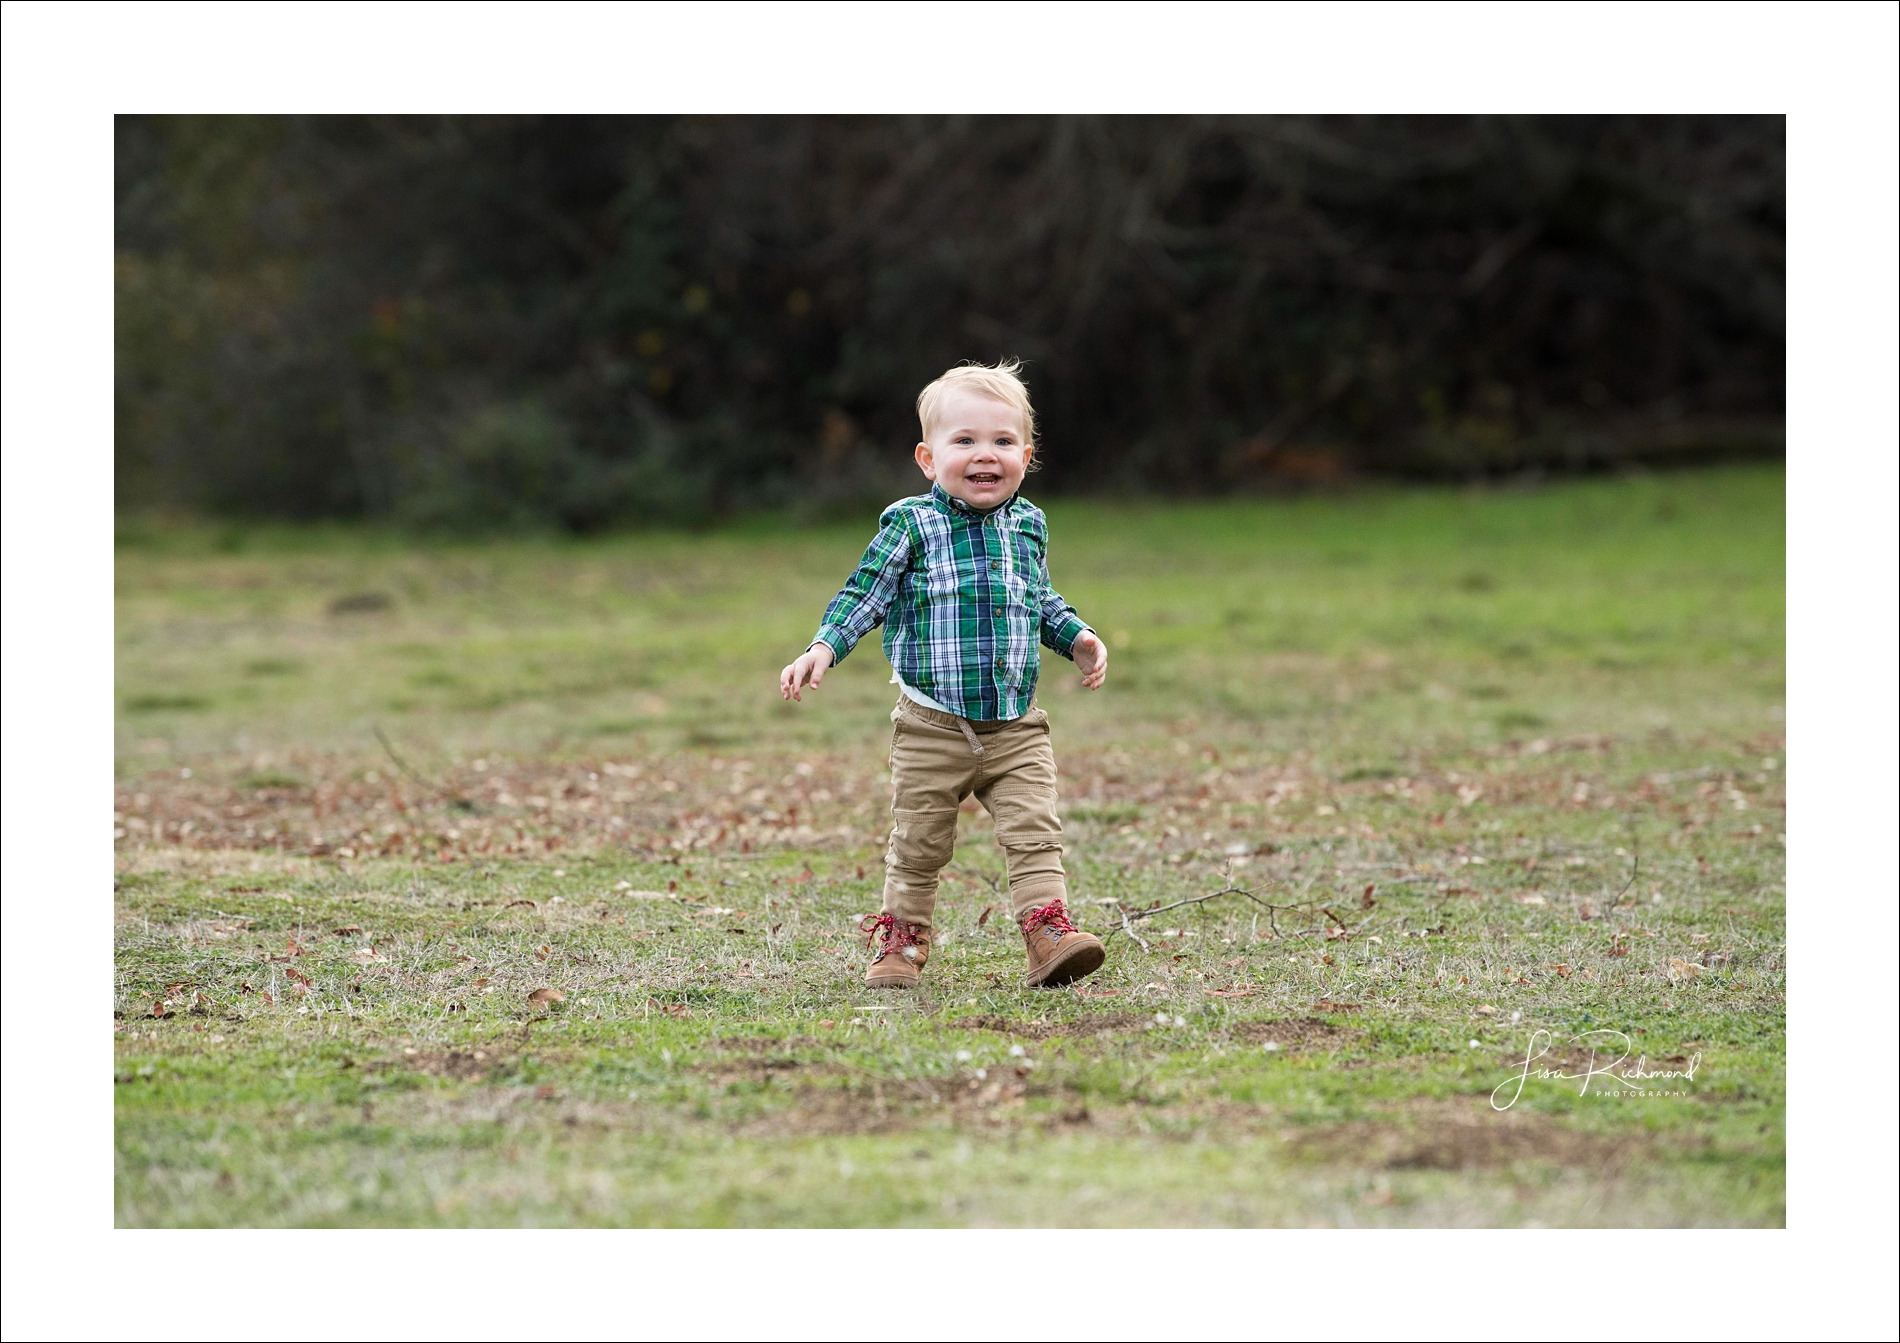 Chasing Xav, a cute little guy with the sweetest smile&#8230;.